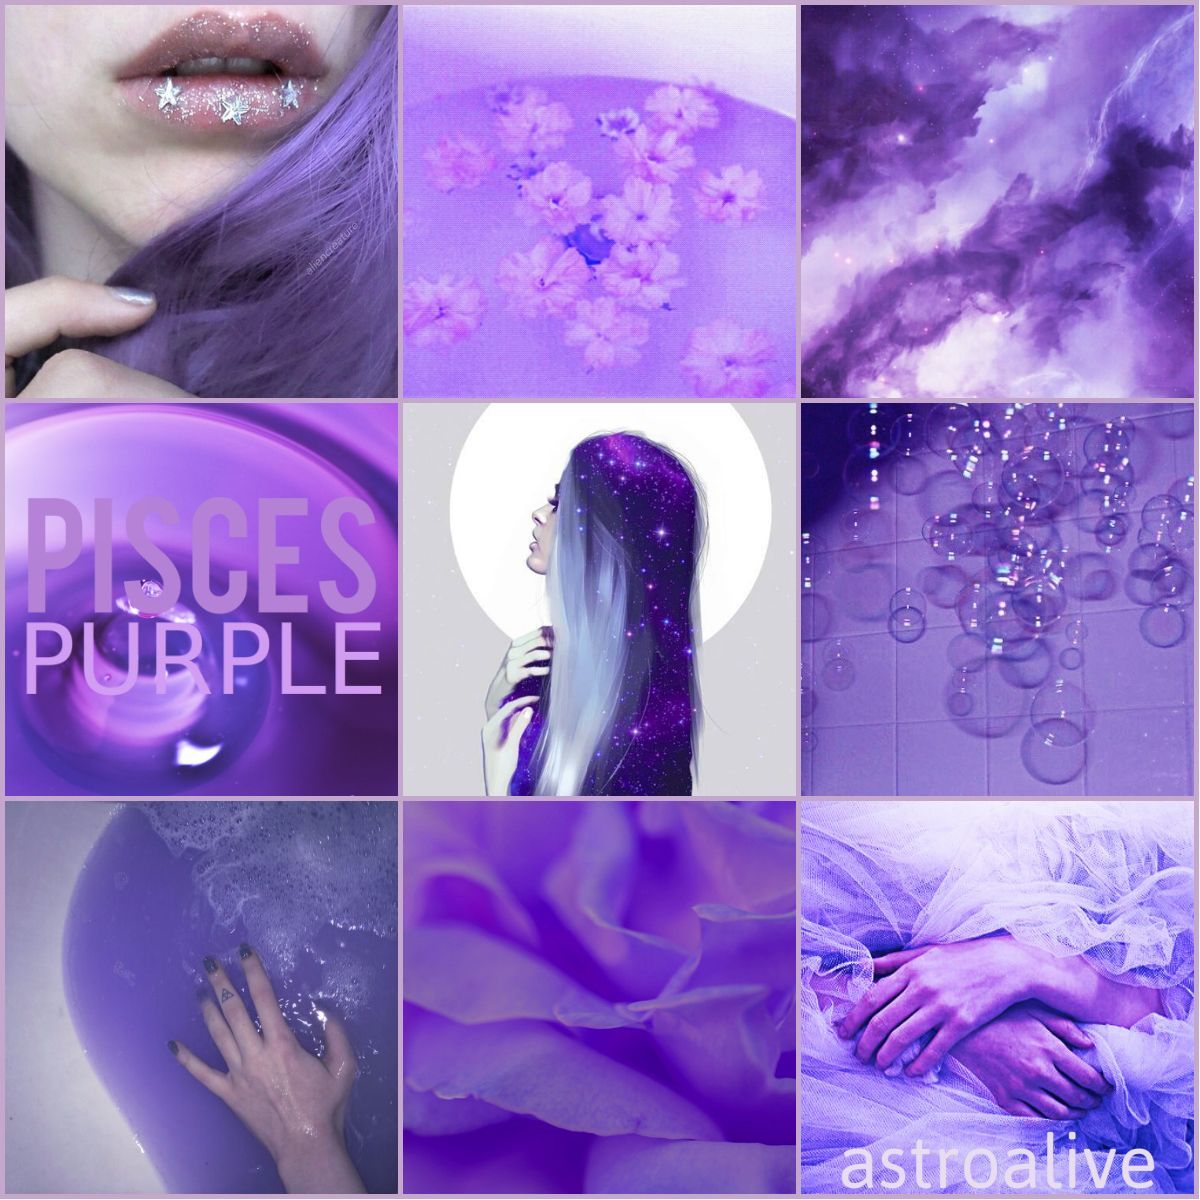 Aesthetic collage for the zodiac sign of Pisces, in purple. - Pisces